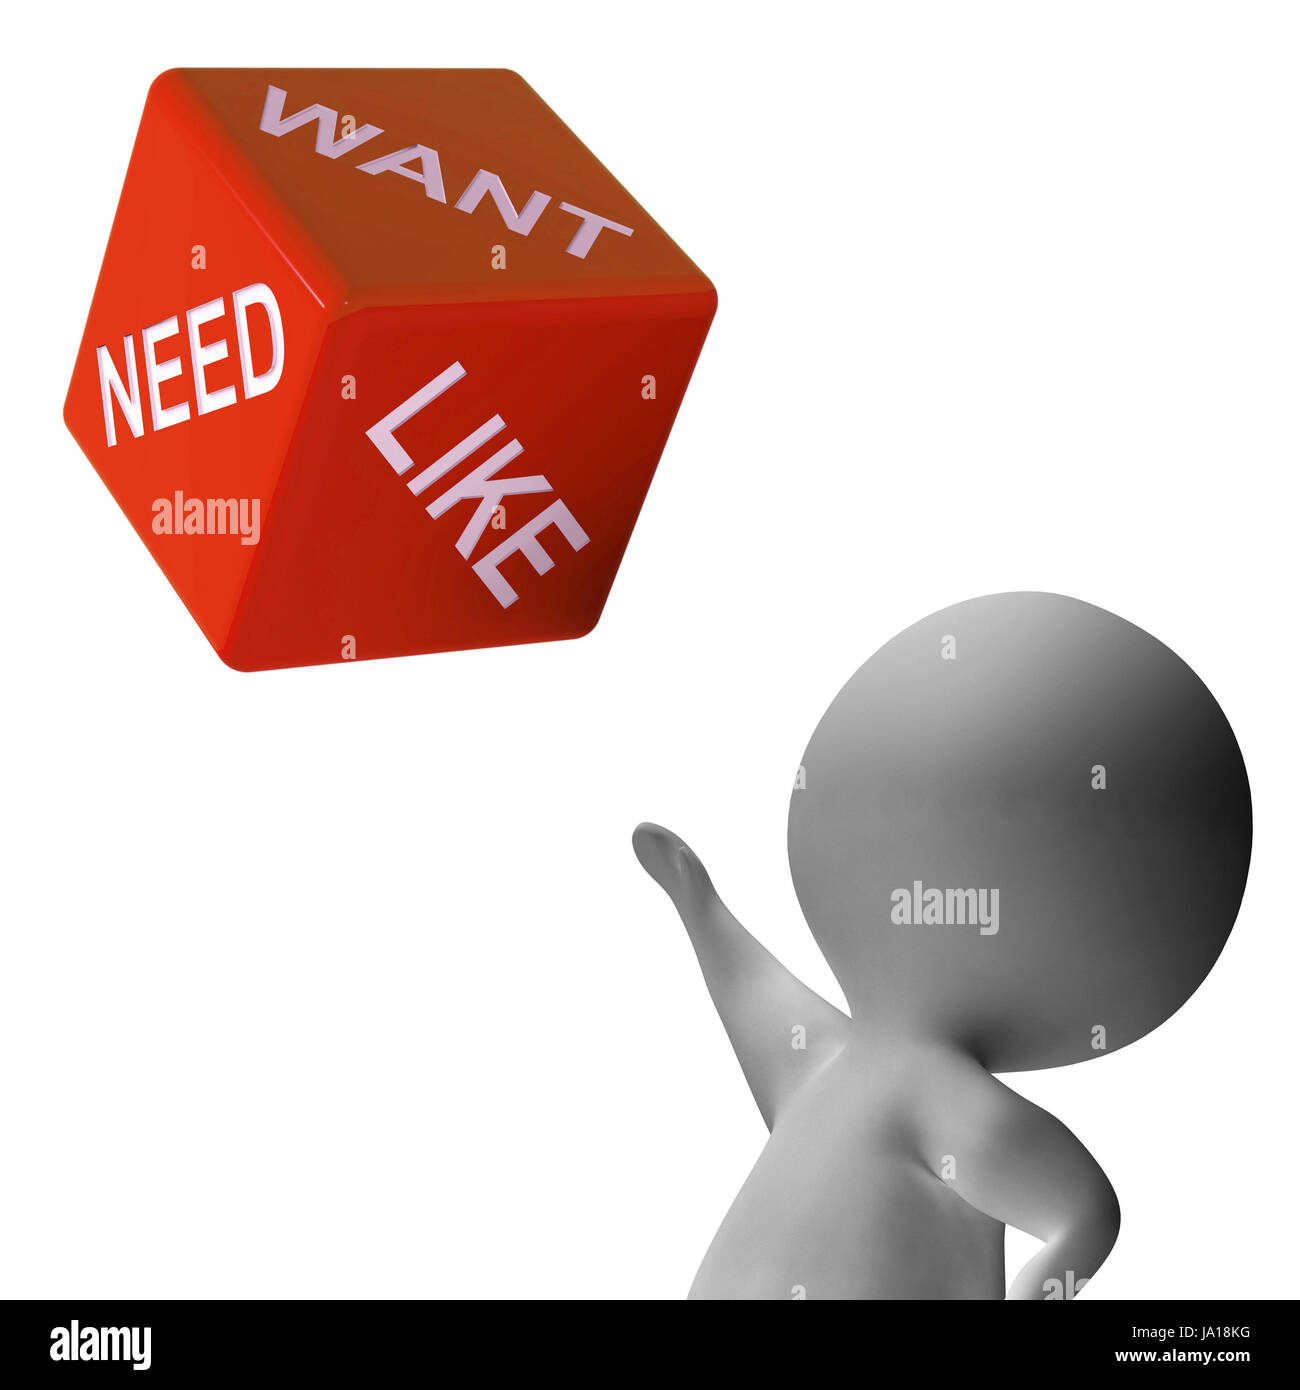 longing, dice, desire, wishes, desires, wish, like, want, need, materialism, Stock Photo